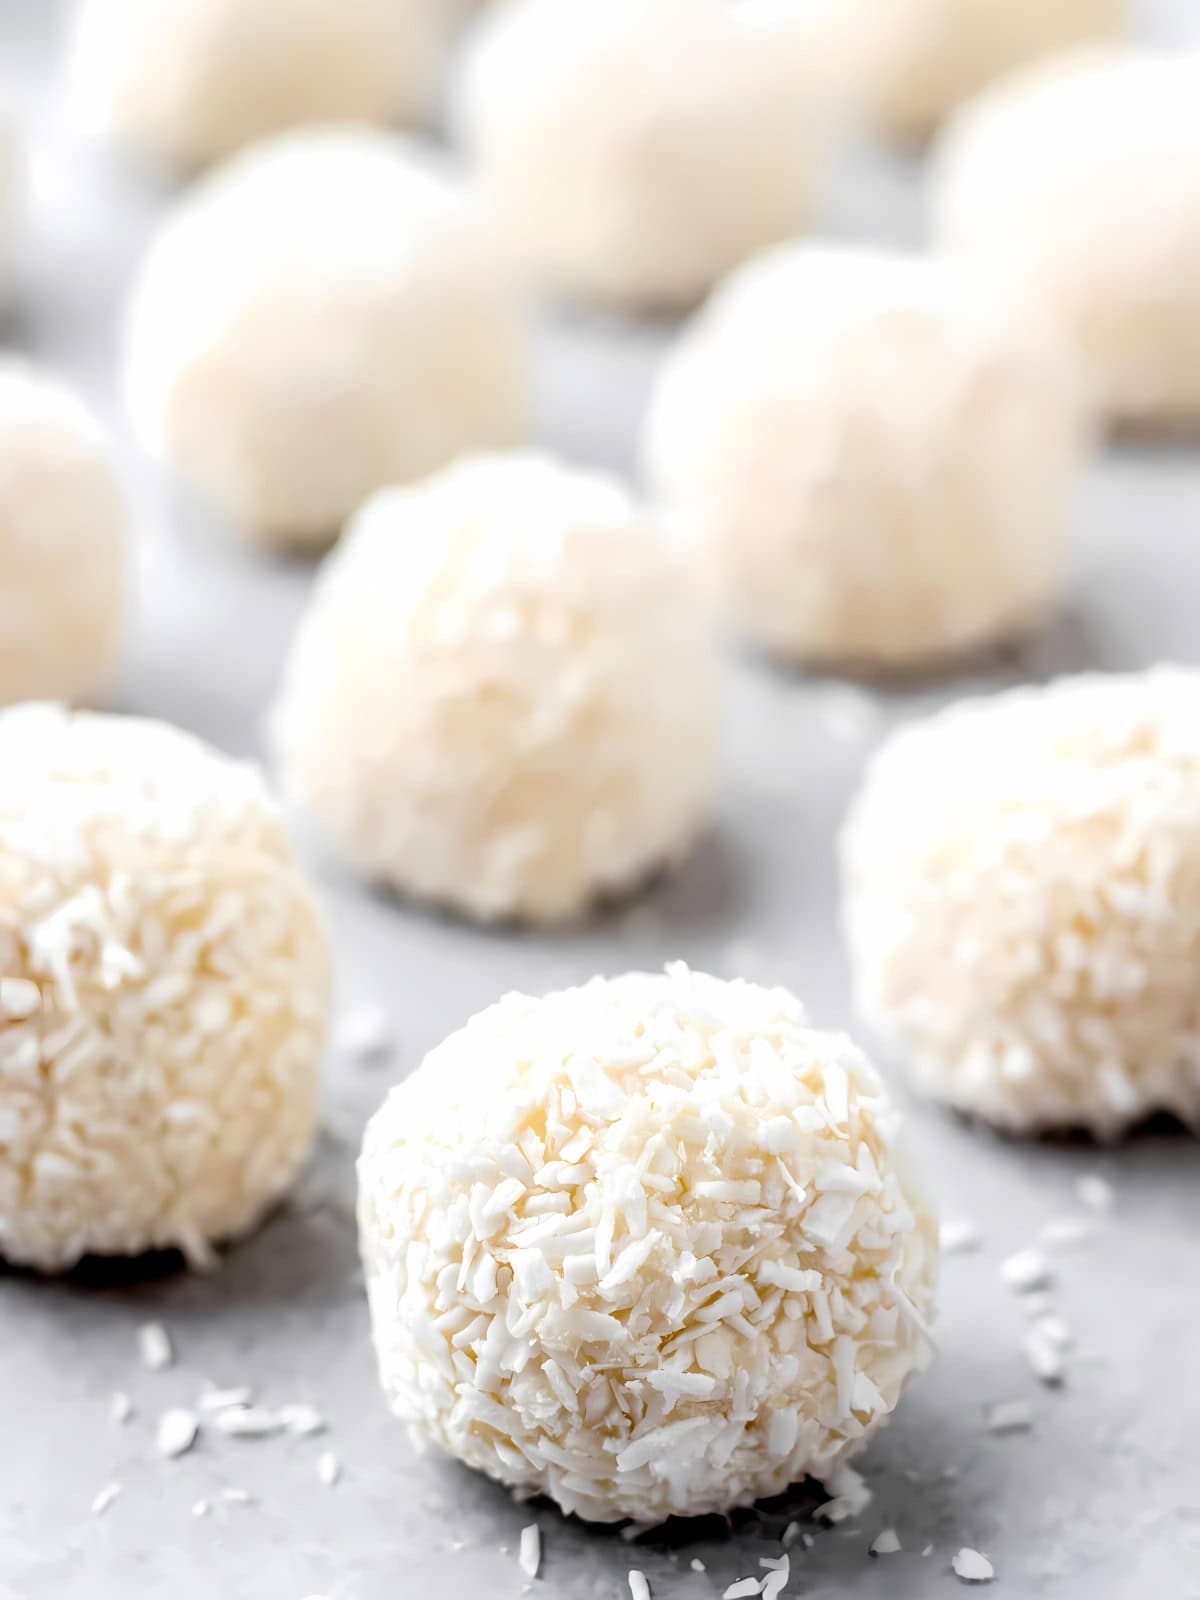 A bunch of white chocolate coconut truffles sprinkled with coconut shavings.